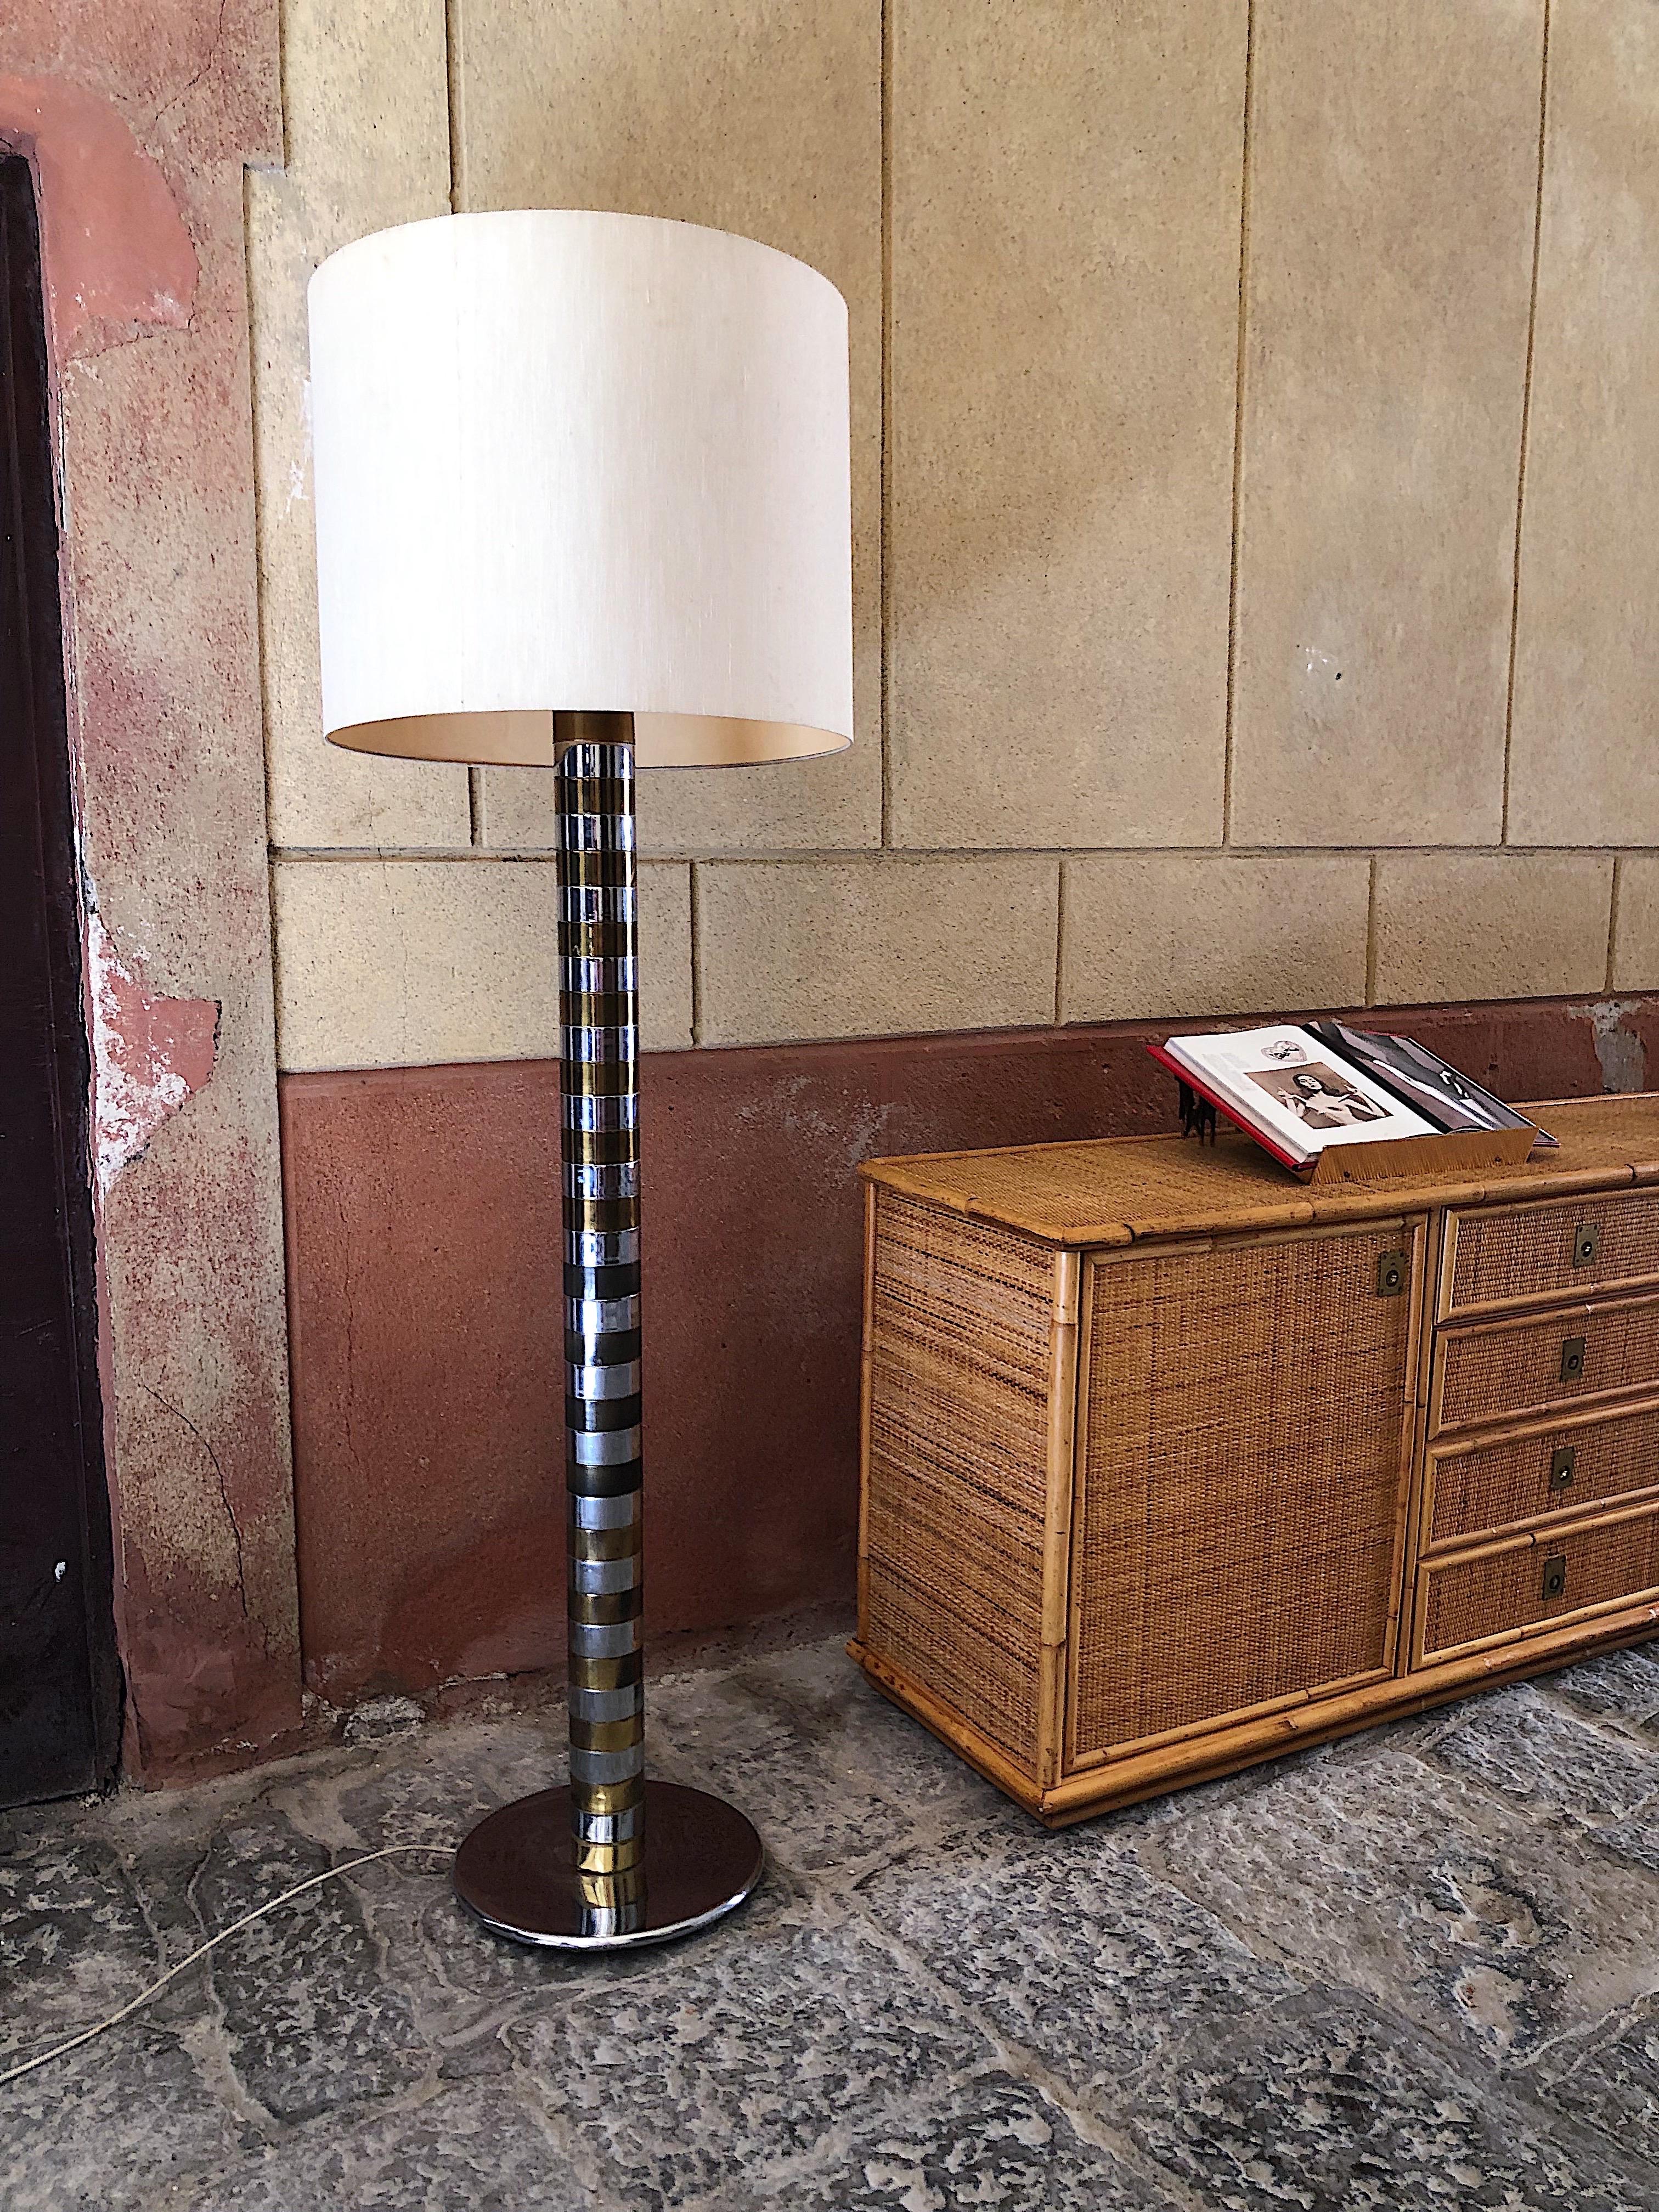 Stunning 1970s modernist floor light by Tommaso Barbi. The base is striped in chrome and brass metal blocks. No visible maker's mark. Original lamp-shade. 